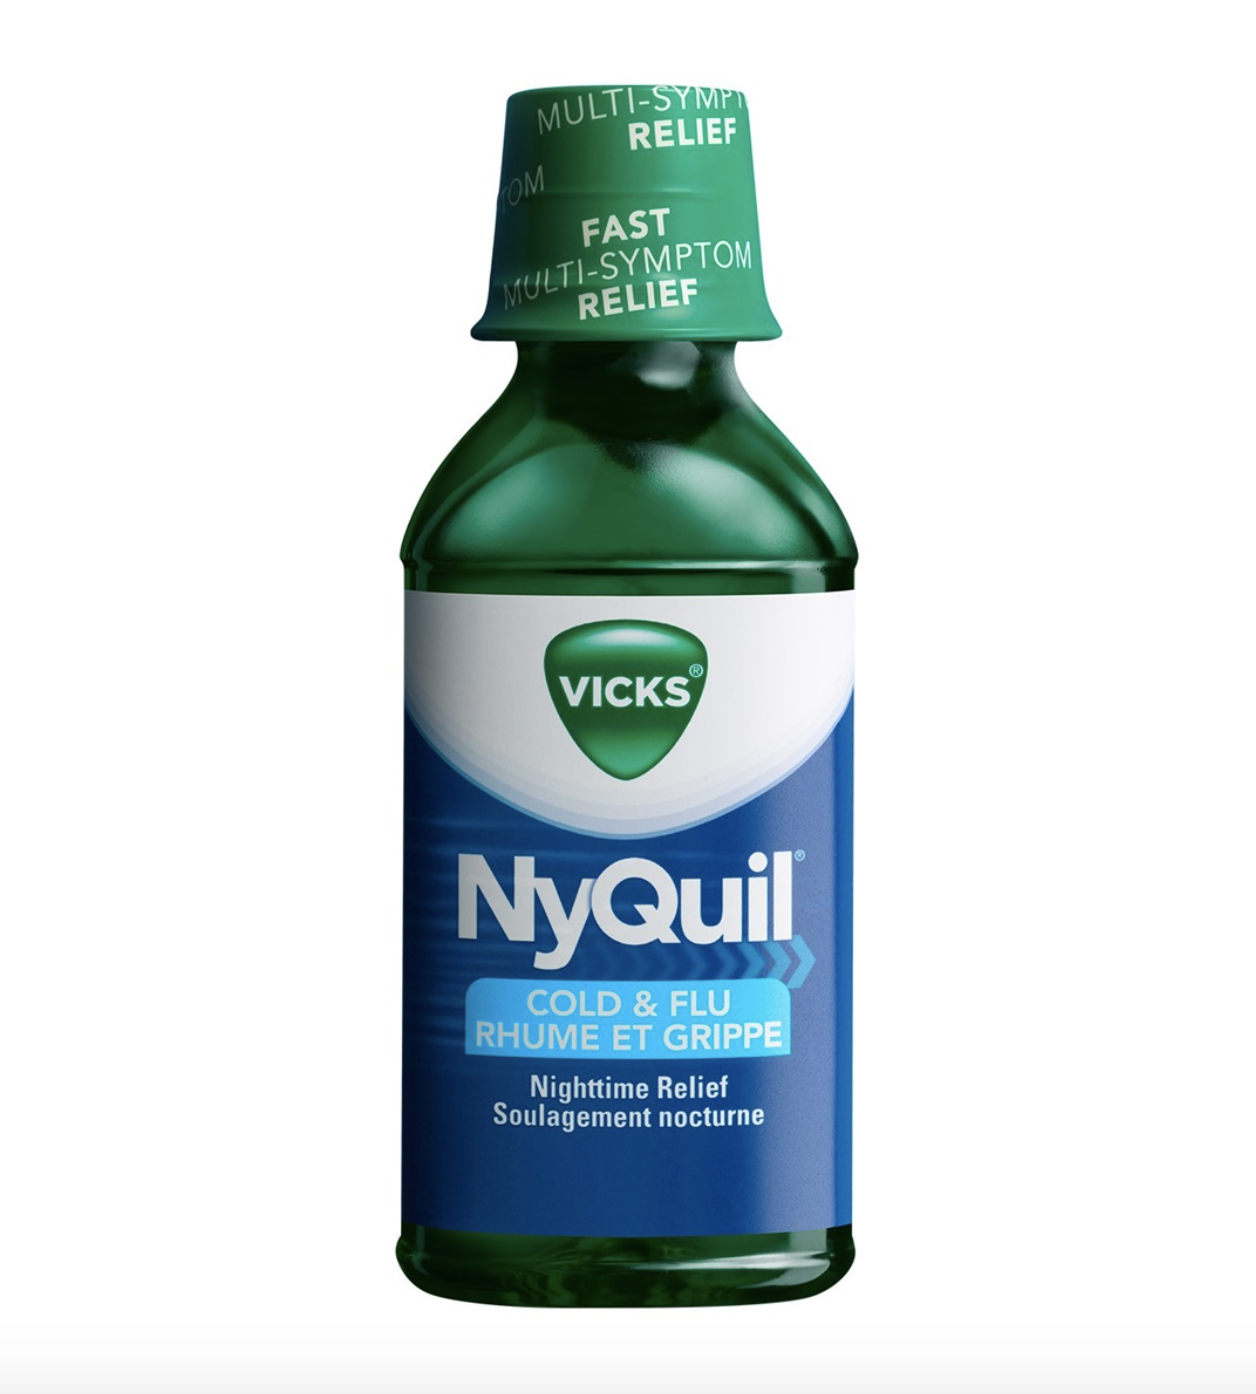 A bottle of Vicks NyQuil